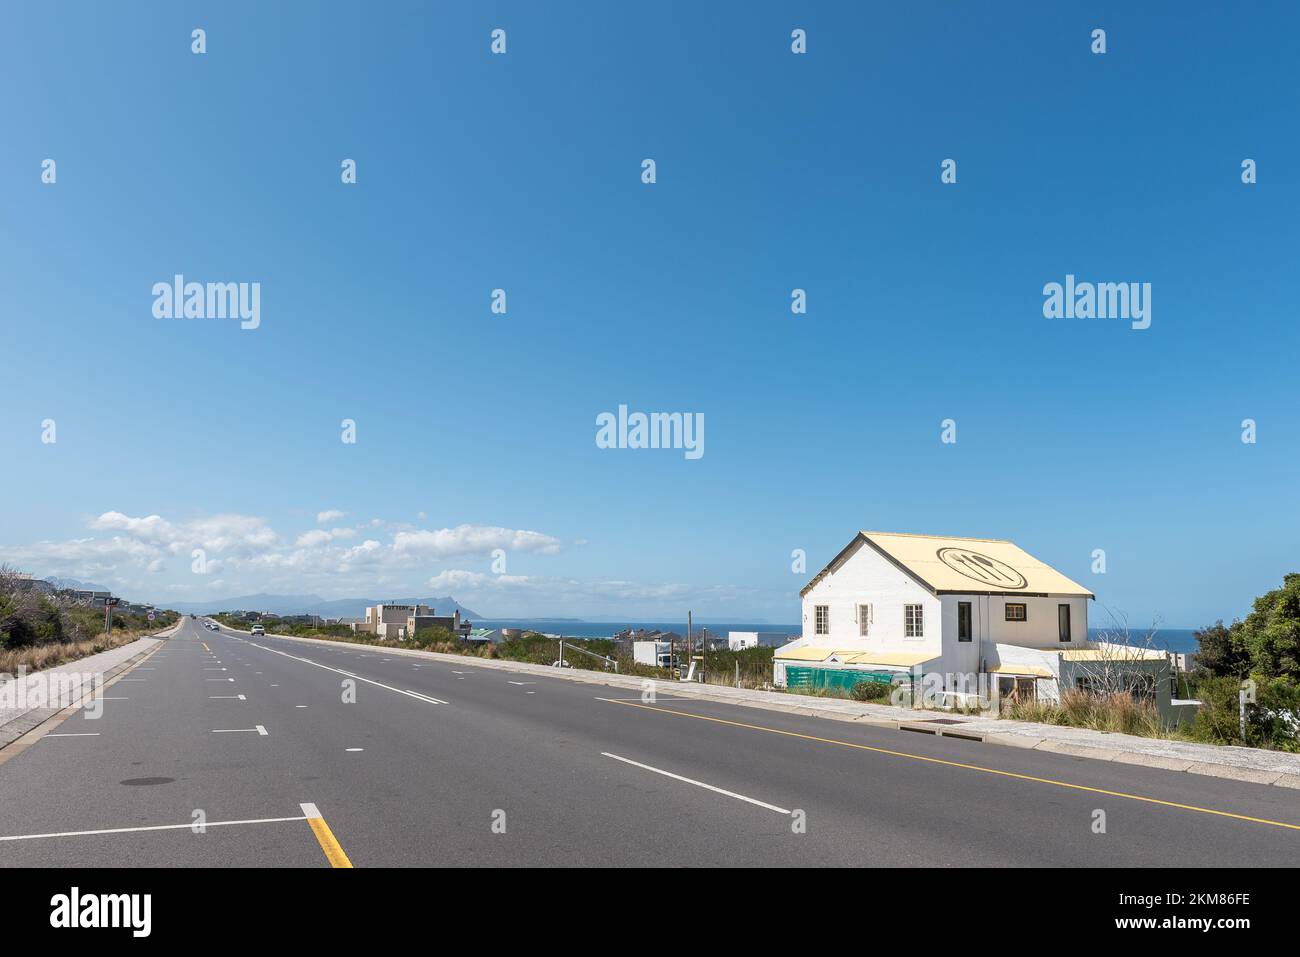 Bettys Bay, South Africa - Sep 20, 2022: A street scene, with businesses and vehicles, in Bettys Bay in the Western Cape Province Stock Photo